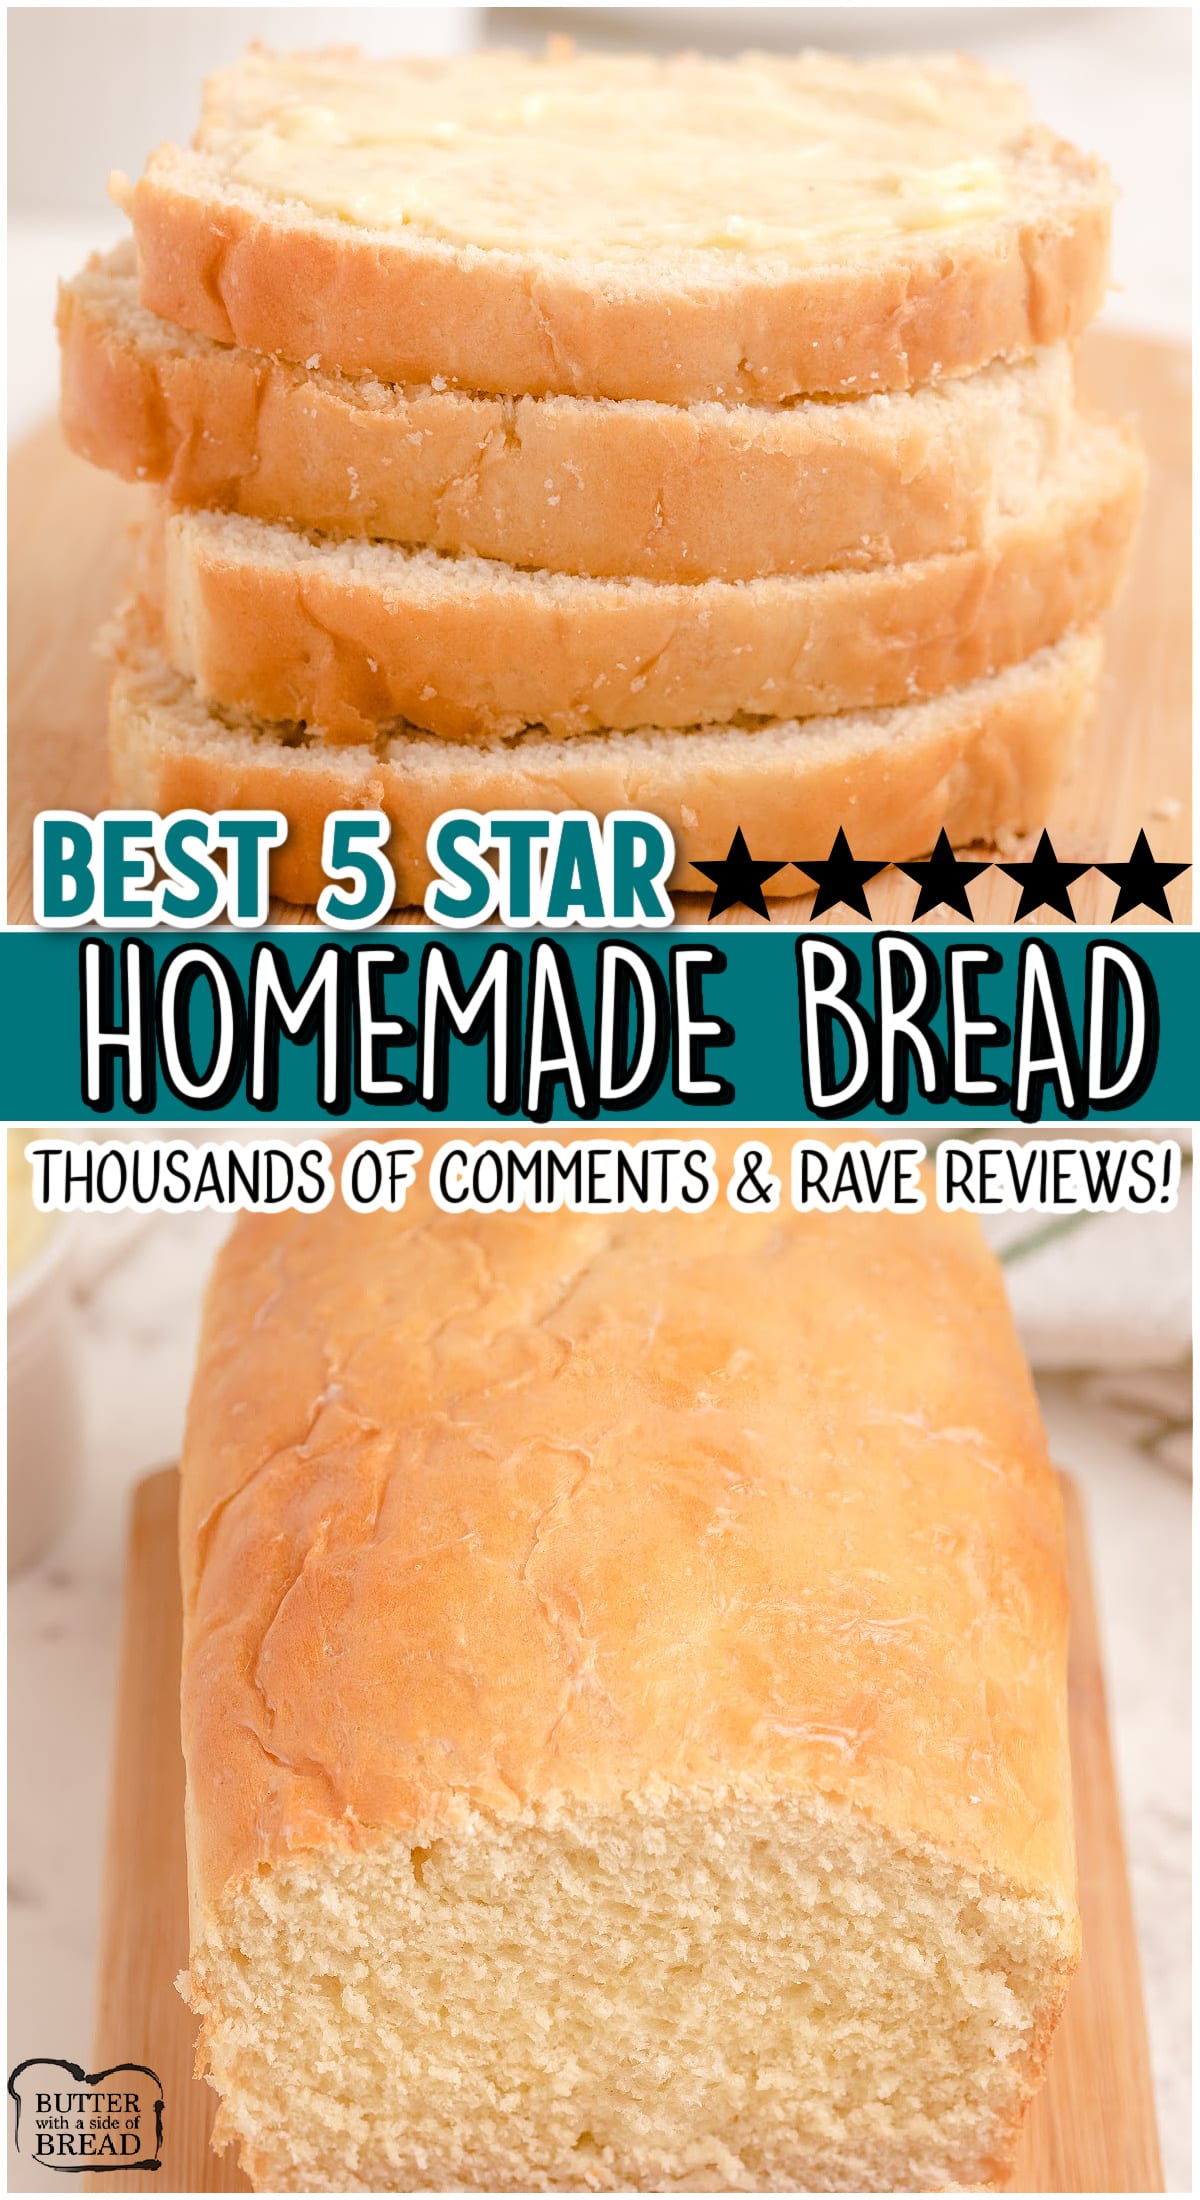 Easy 5 Star Homemade Bread recipe made with simple ingredients & detailed instructions showing how to make bread! Thousands of comments & reviewers agree this is the BEST homemade bread for both beginners and expert bakers.